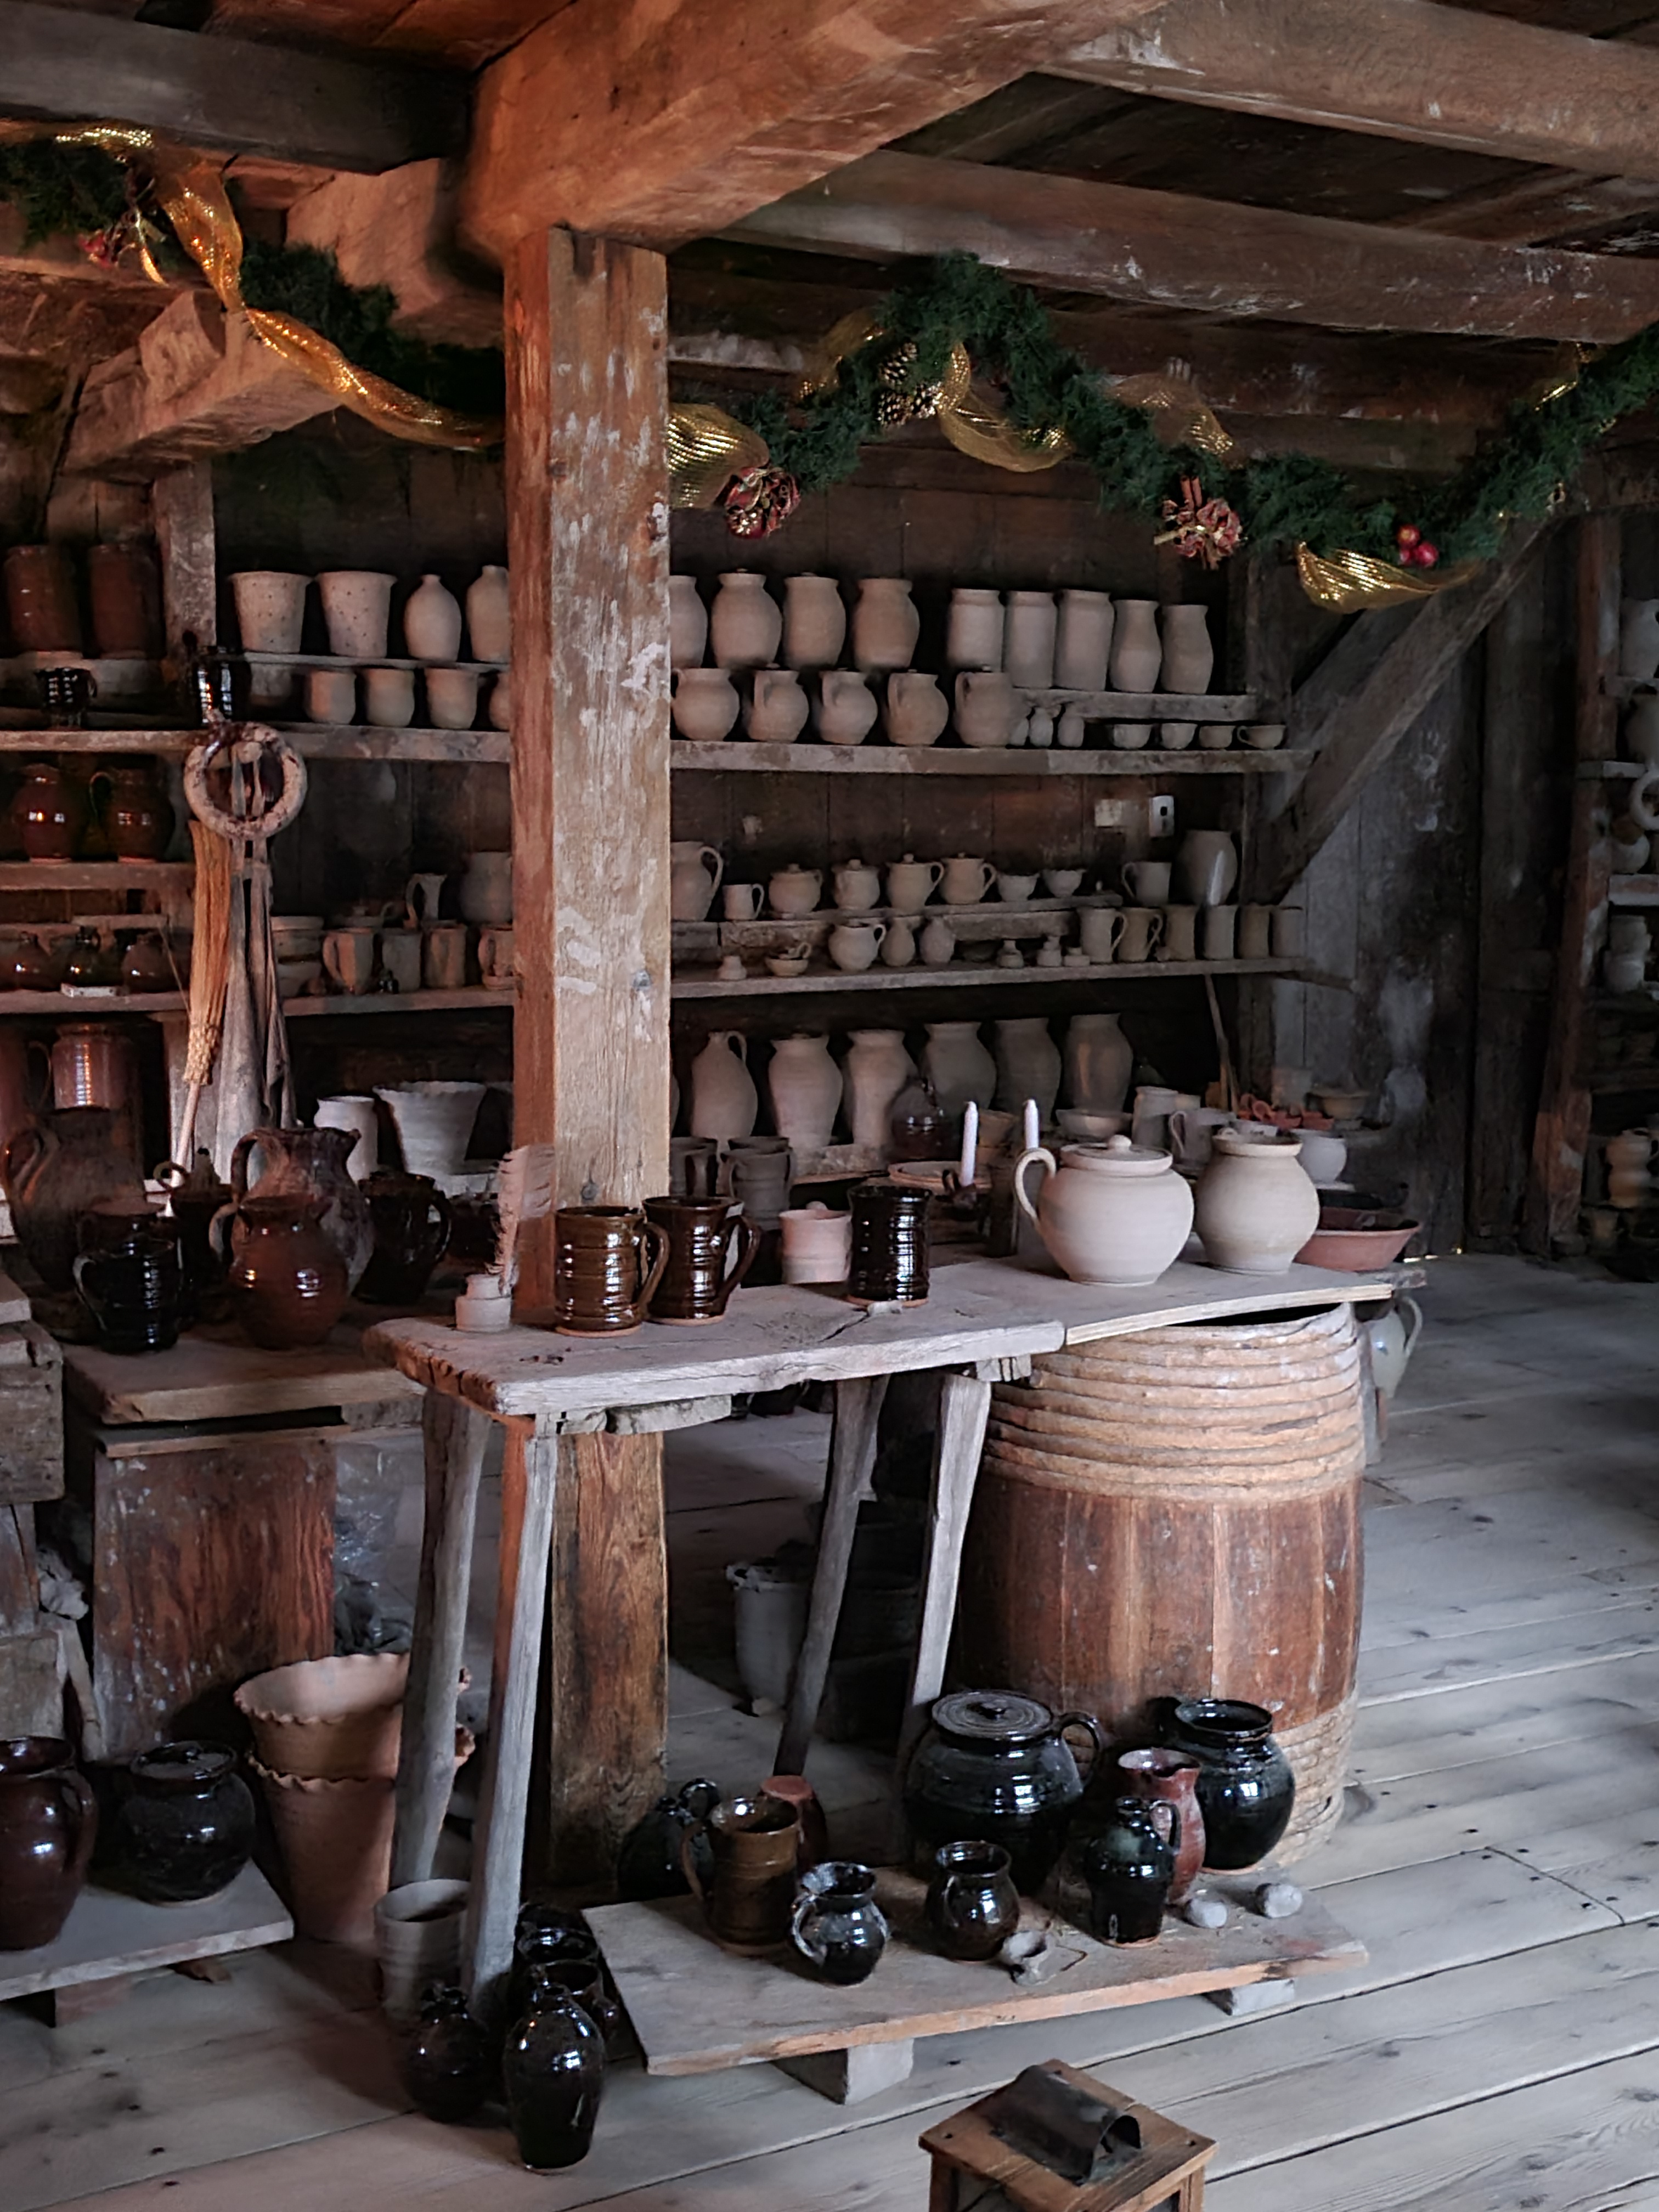 Potters Shed and different kinds of potteries preserved at Old Sturbridge Village, Sturbridge, MA.